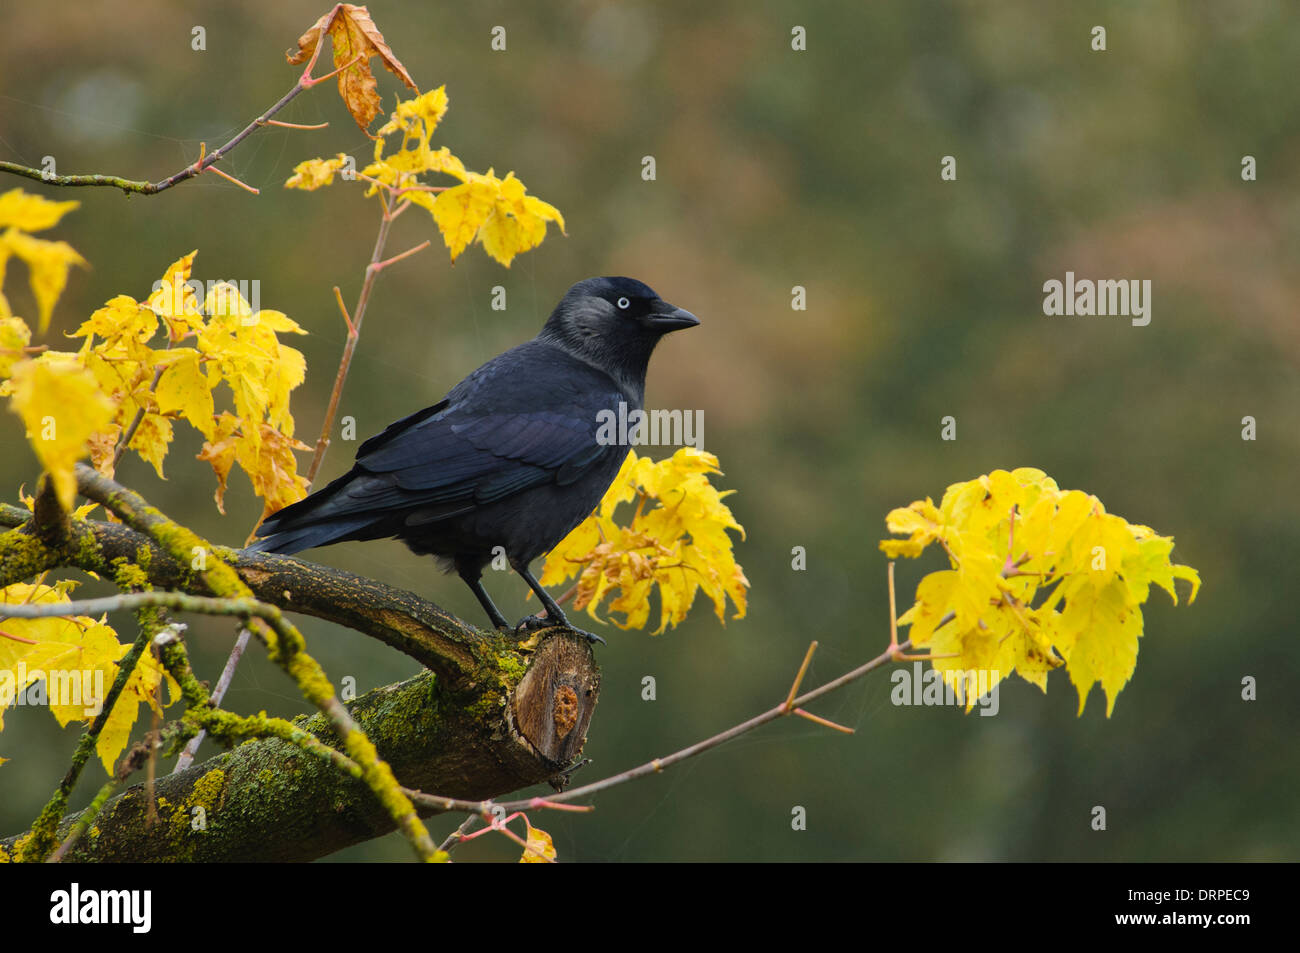 Jackdaw (Corvus monedula) perched on a cut branch surrounded by yellow autumn leaves, near Ripon, North Yorkshire. October. Stock Photo